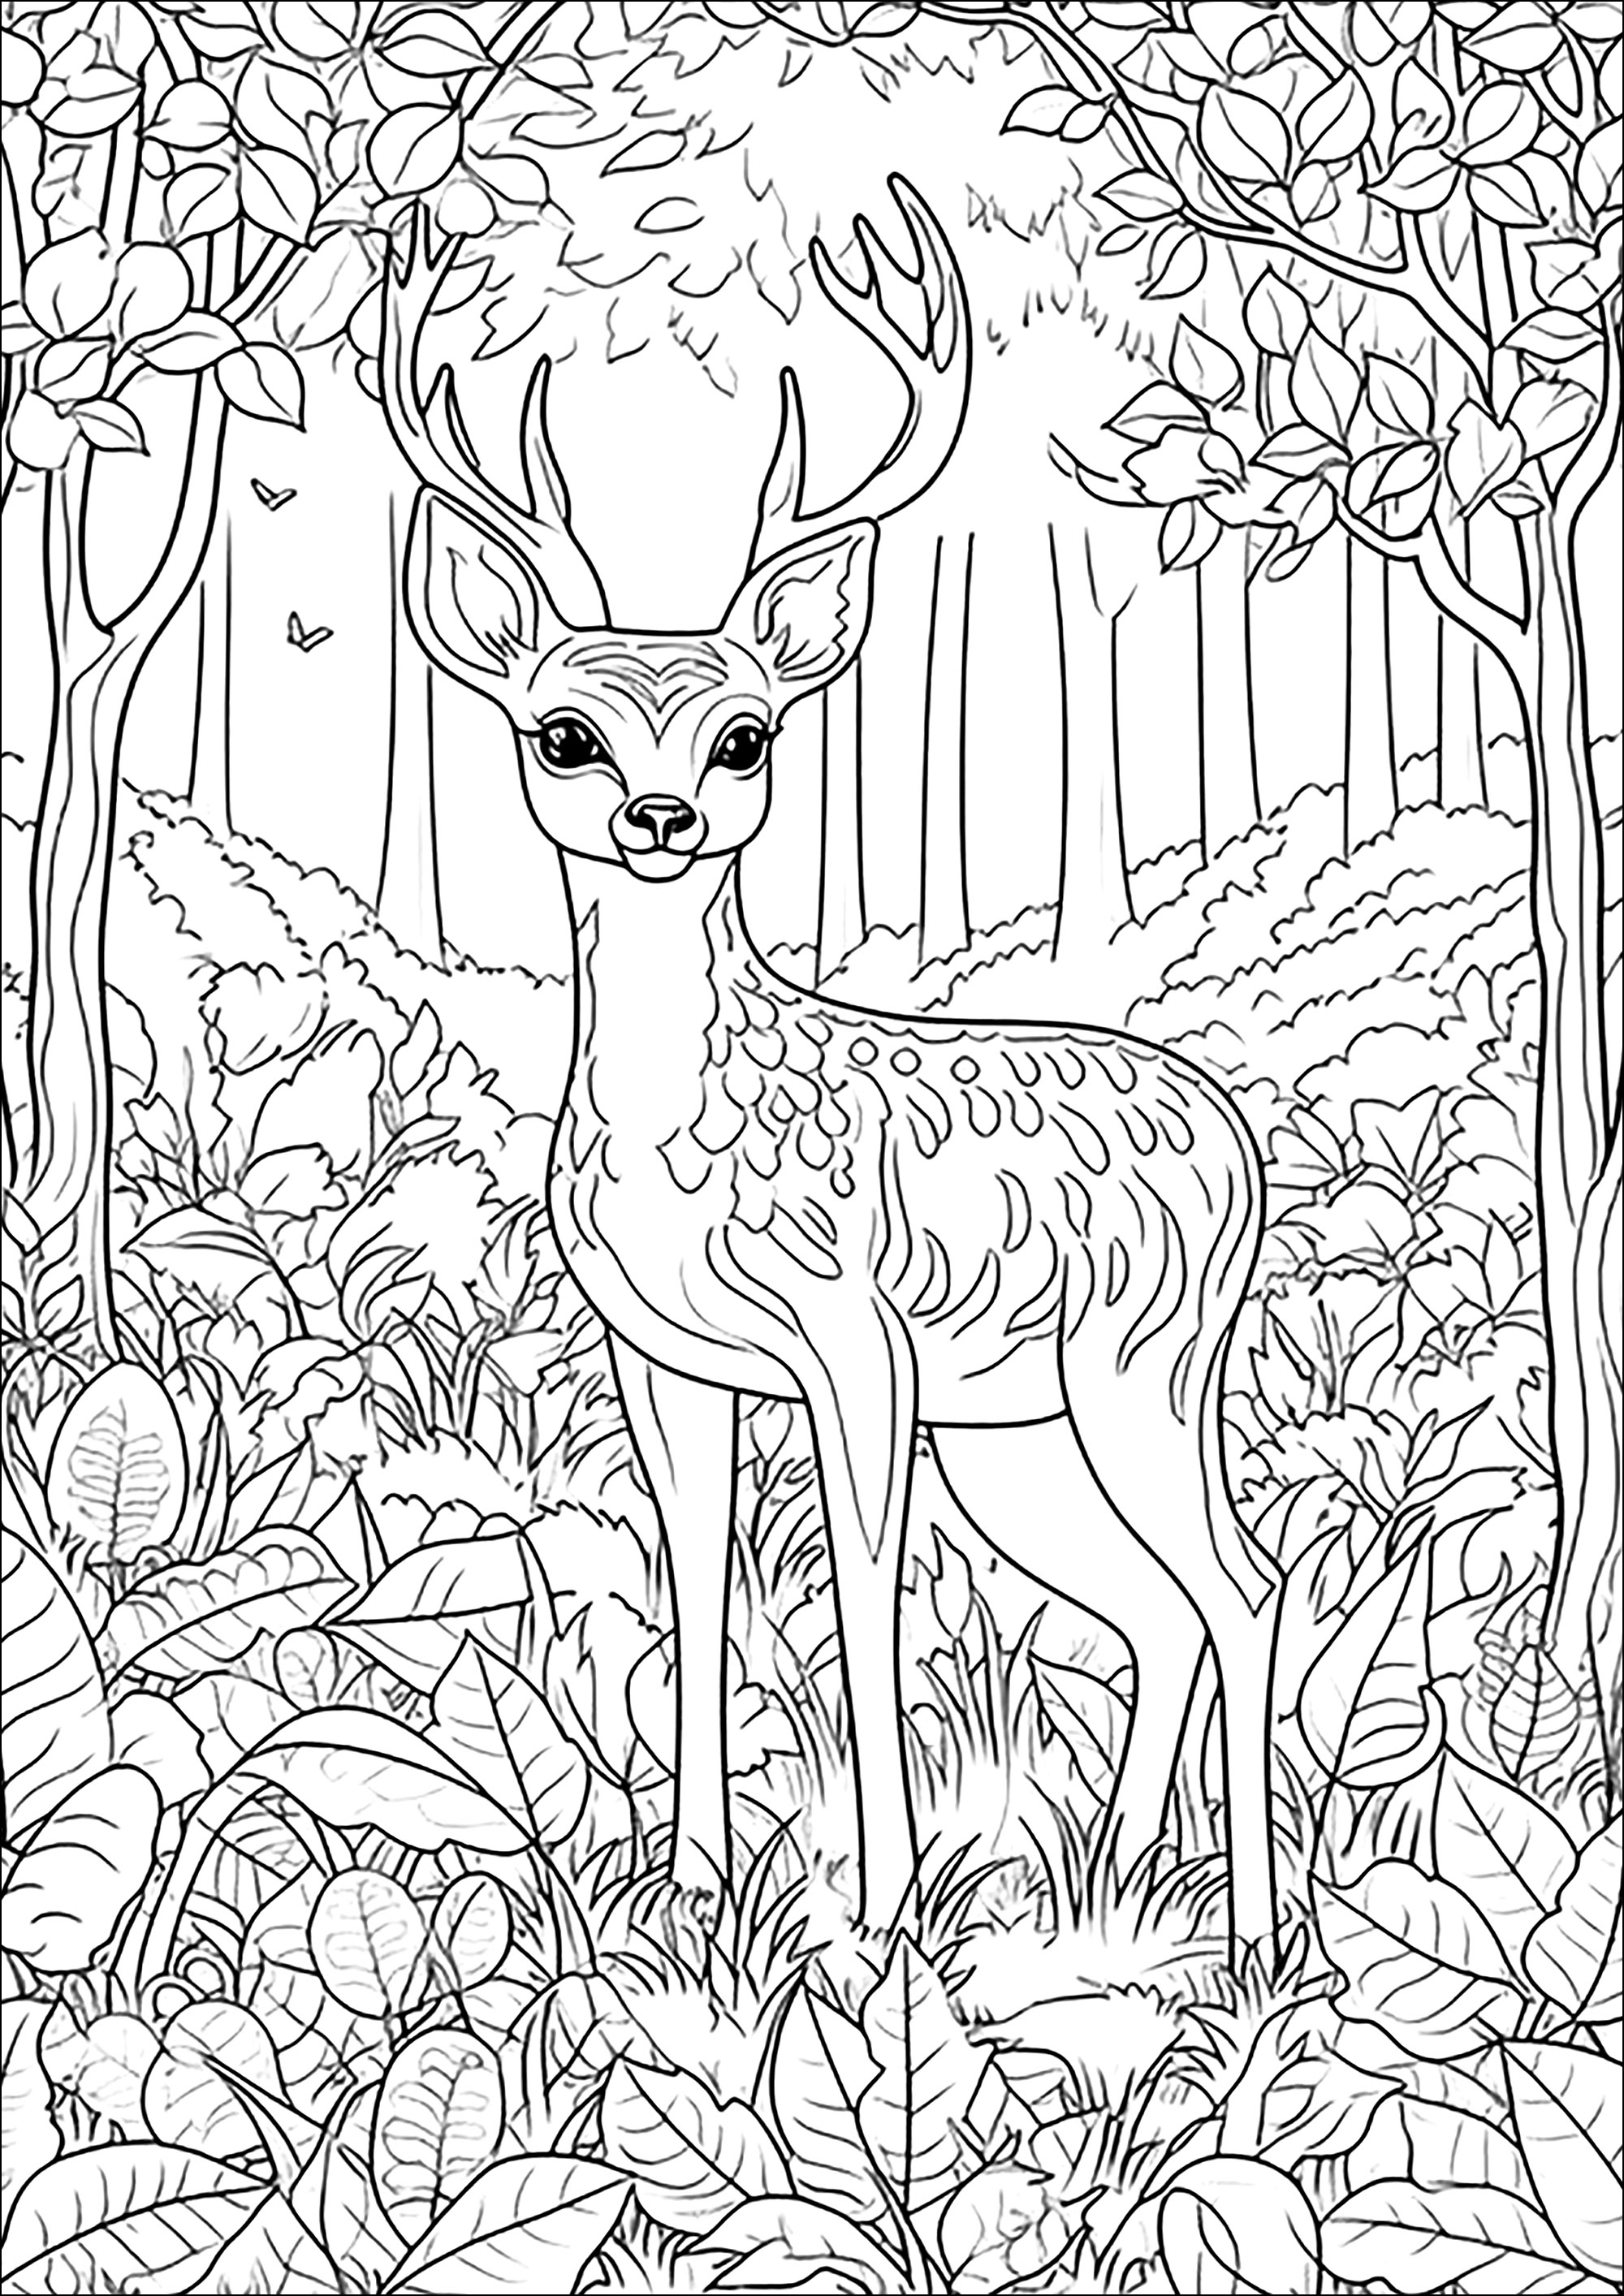 Pretty deer in the forest. Many details to color